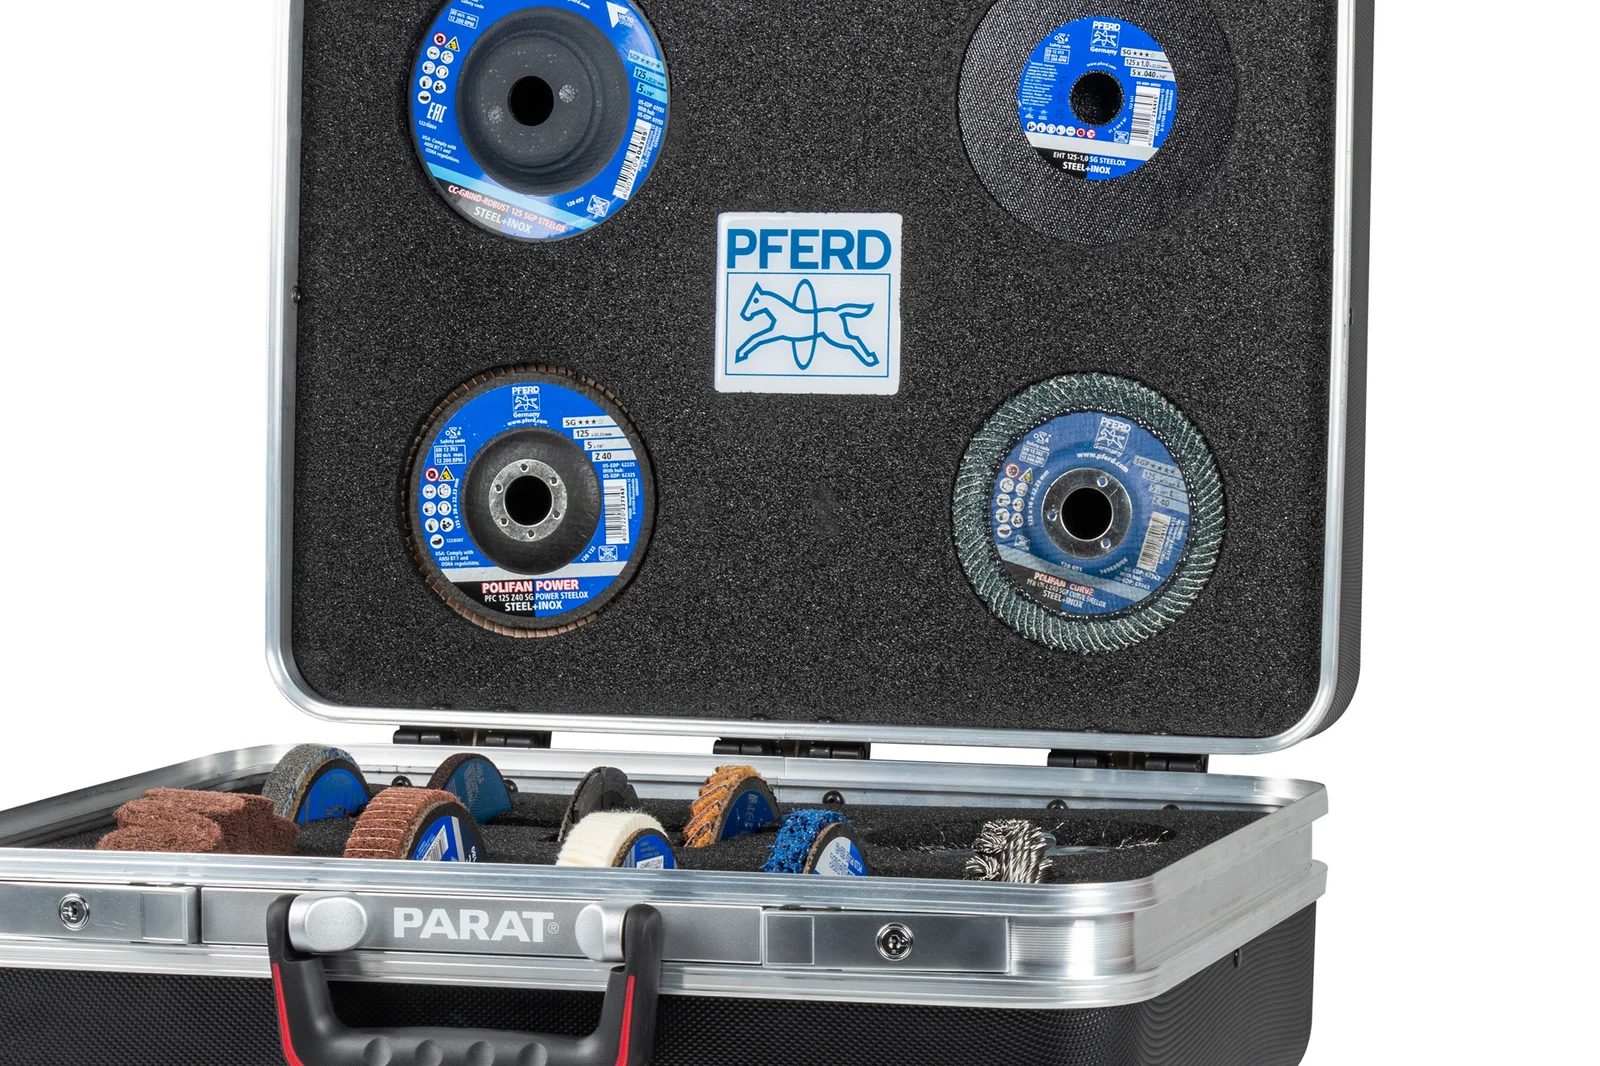 Open project case from PFERD with individual interior fittings